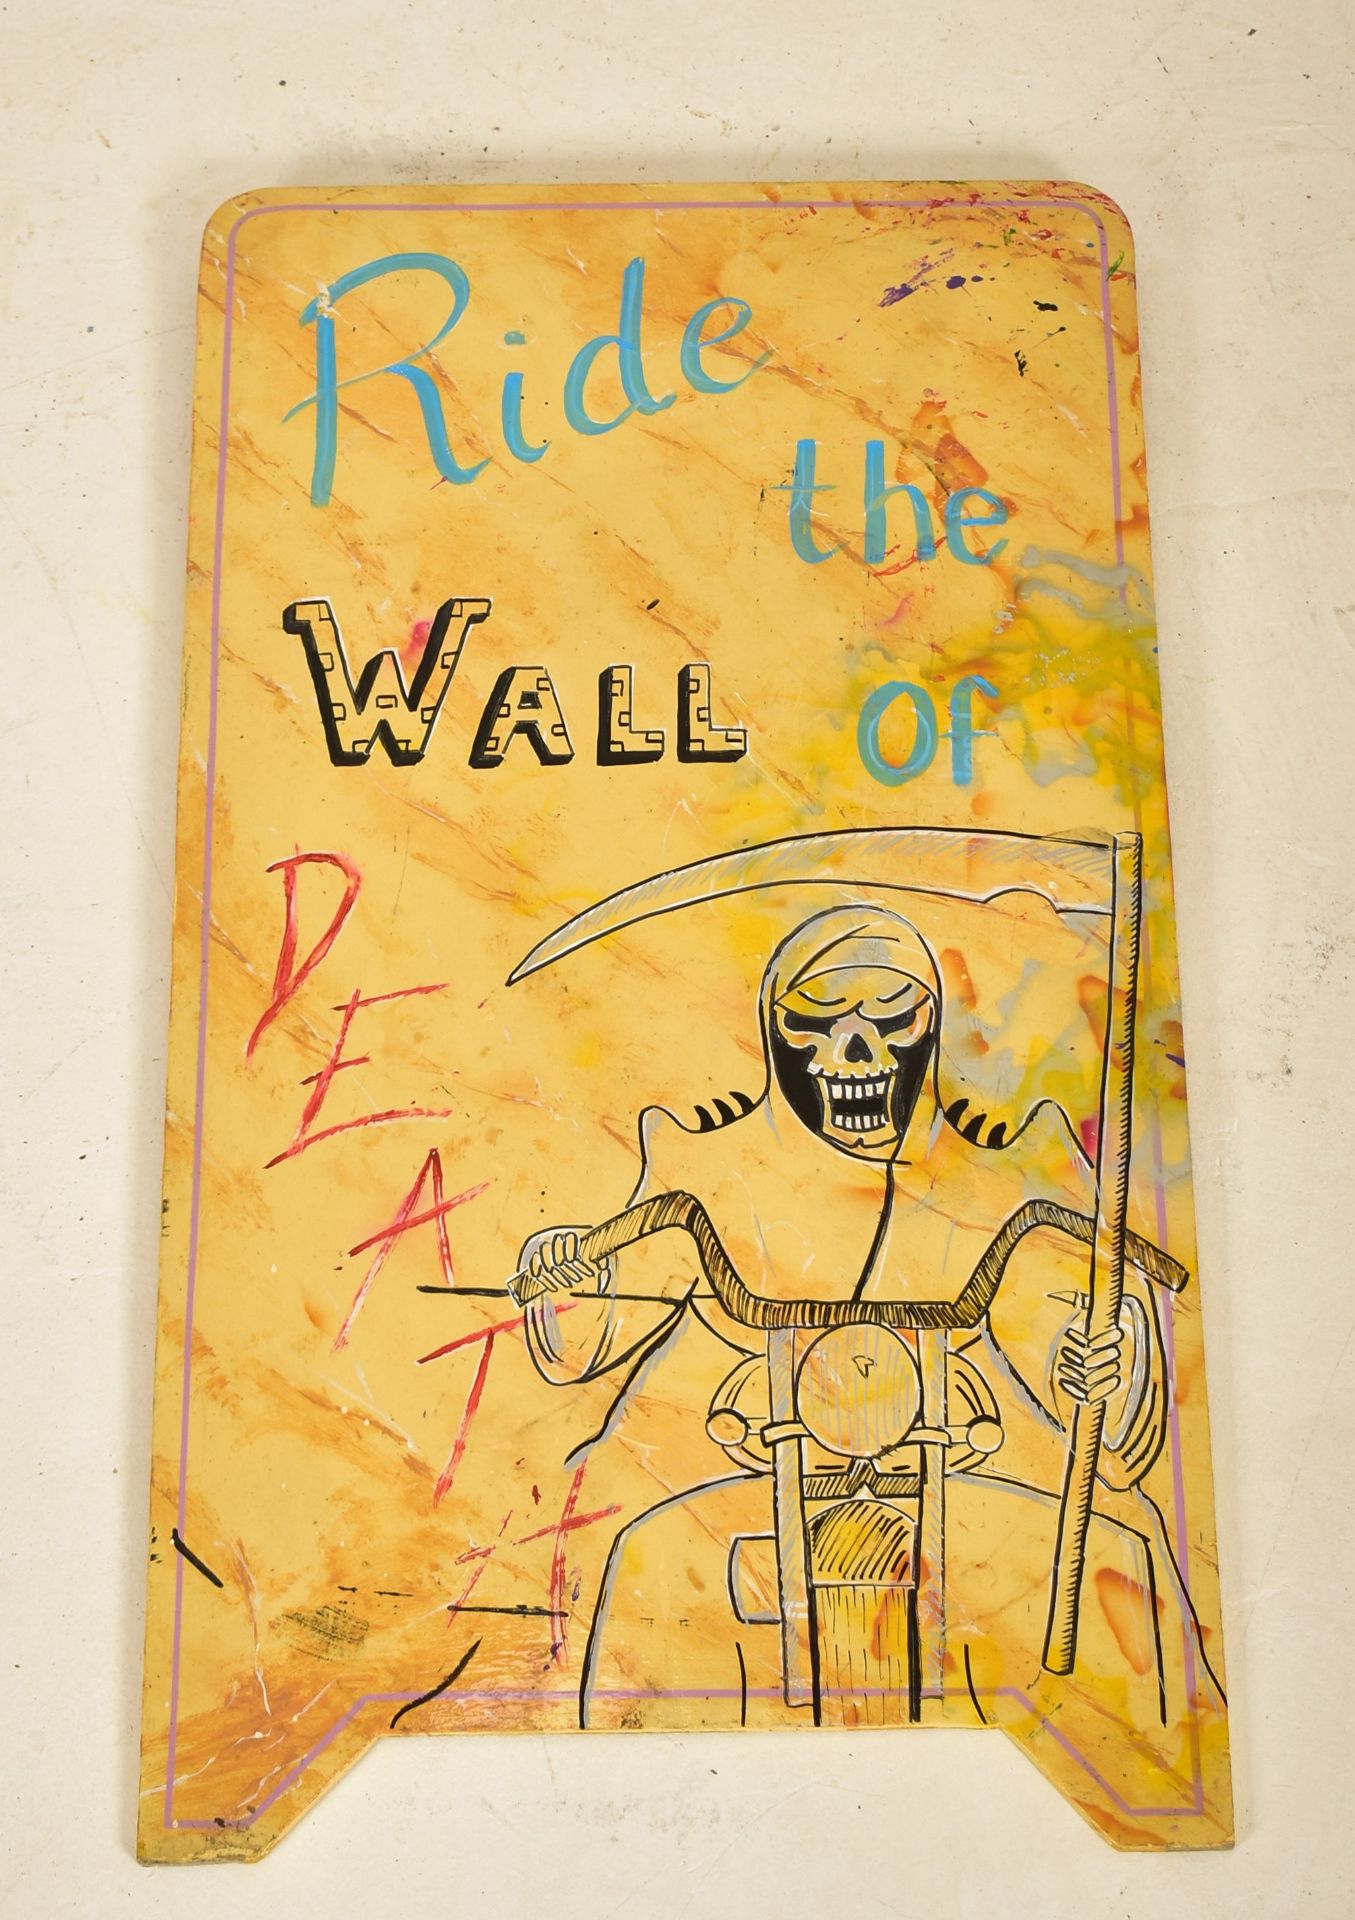 RIDE THE WALL OF DEATH - 20TH CENTURY FAIRGROUND SIGN - Image 2 of 4